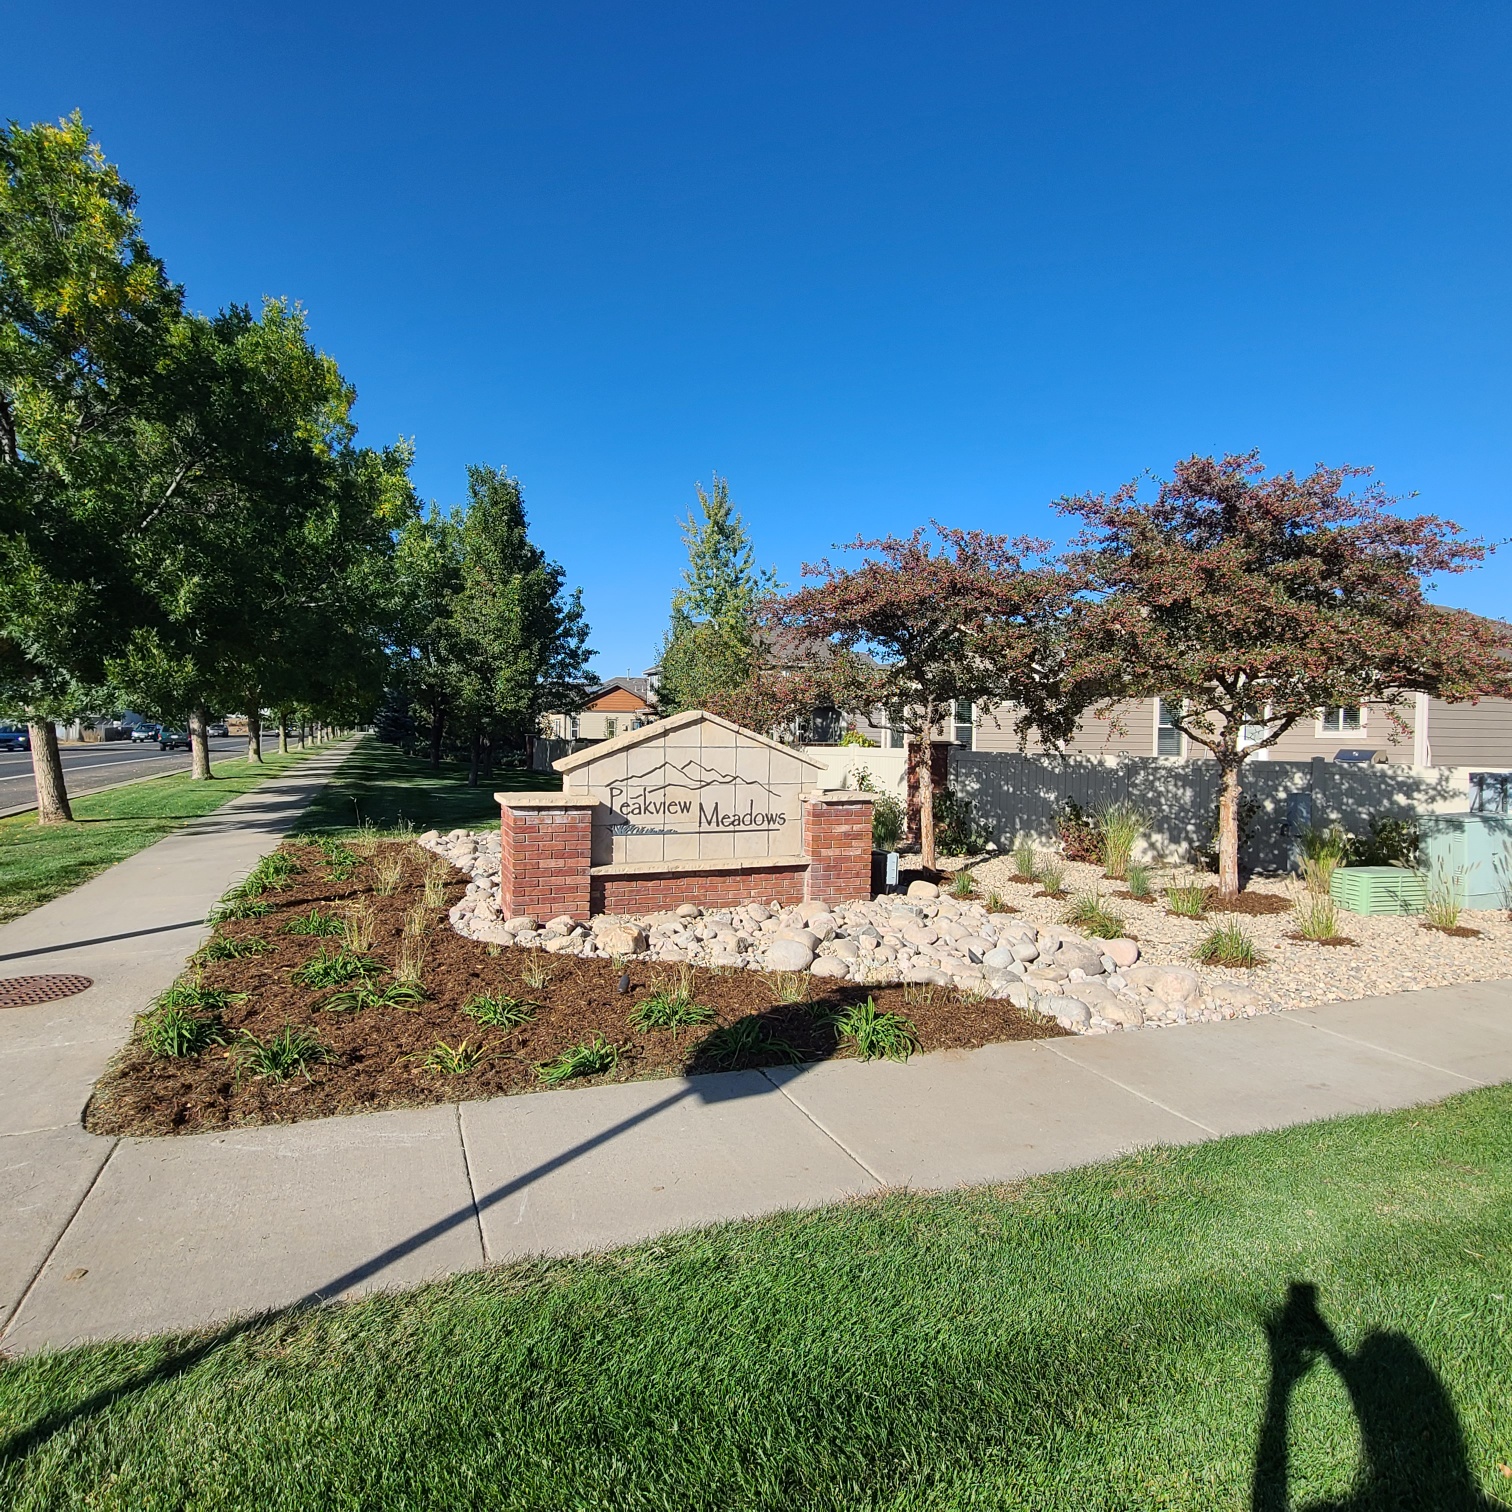 Gallery Northern Colorado Landscaping, Northern Colorado Landscaping